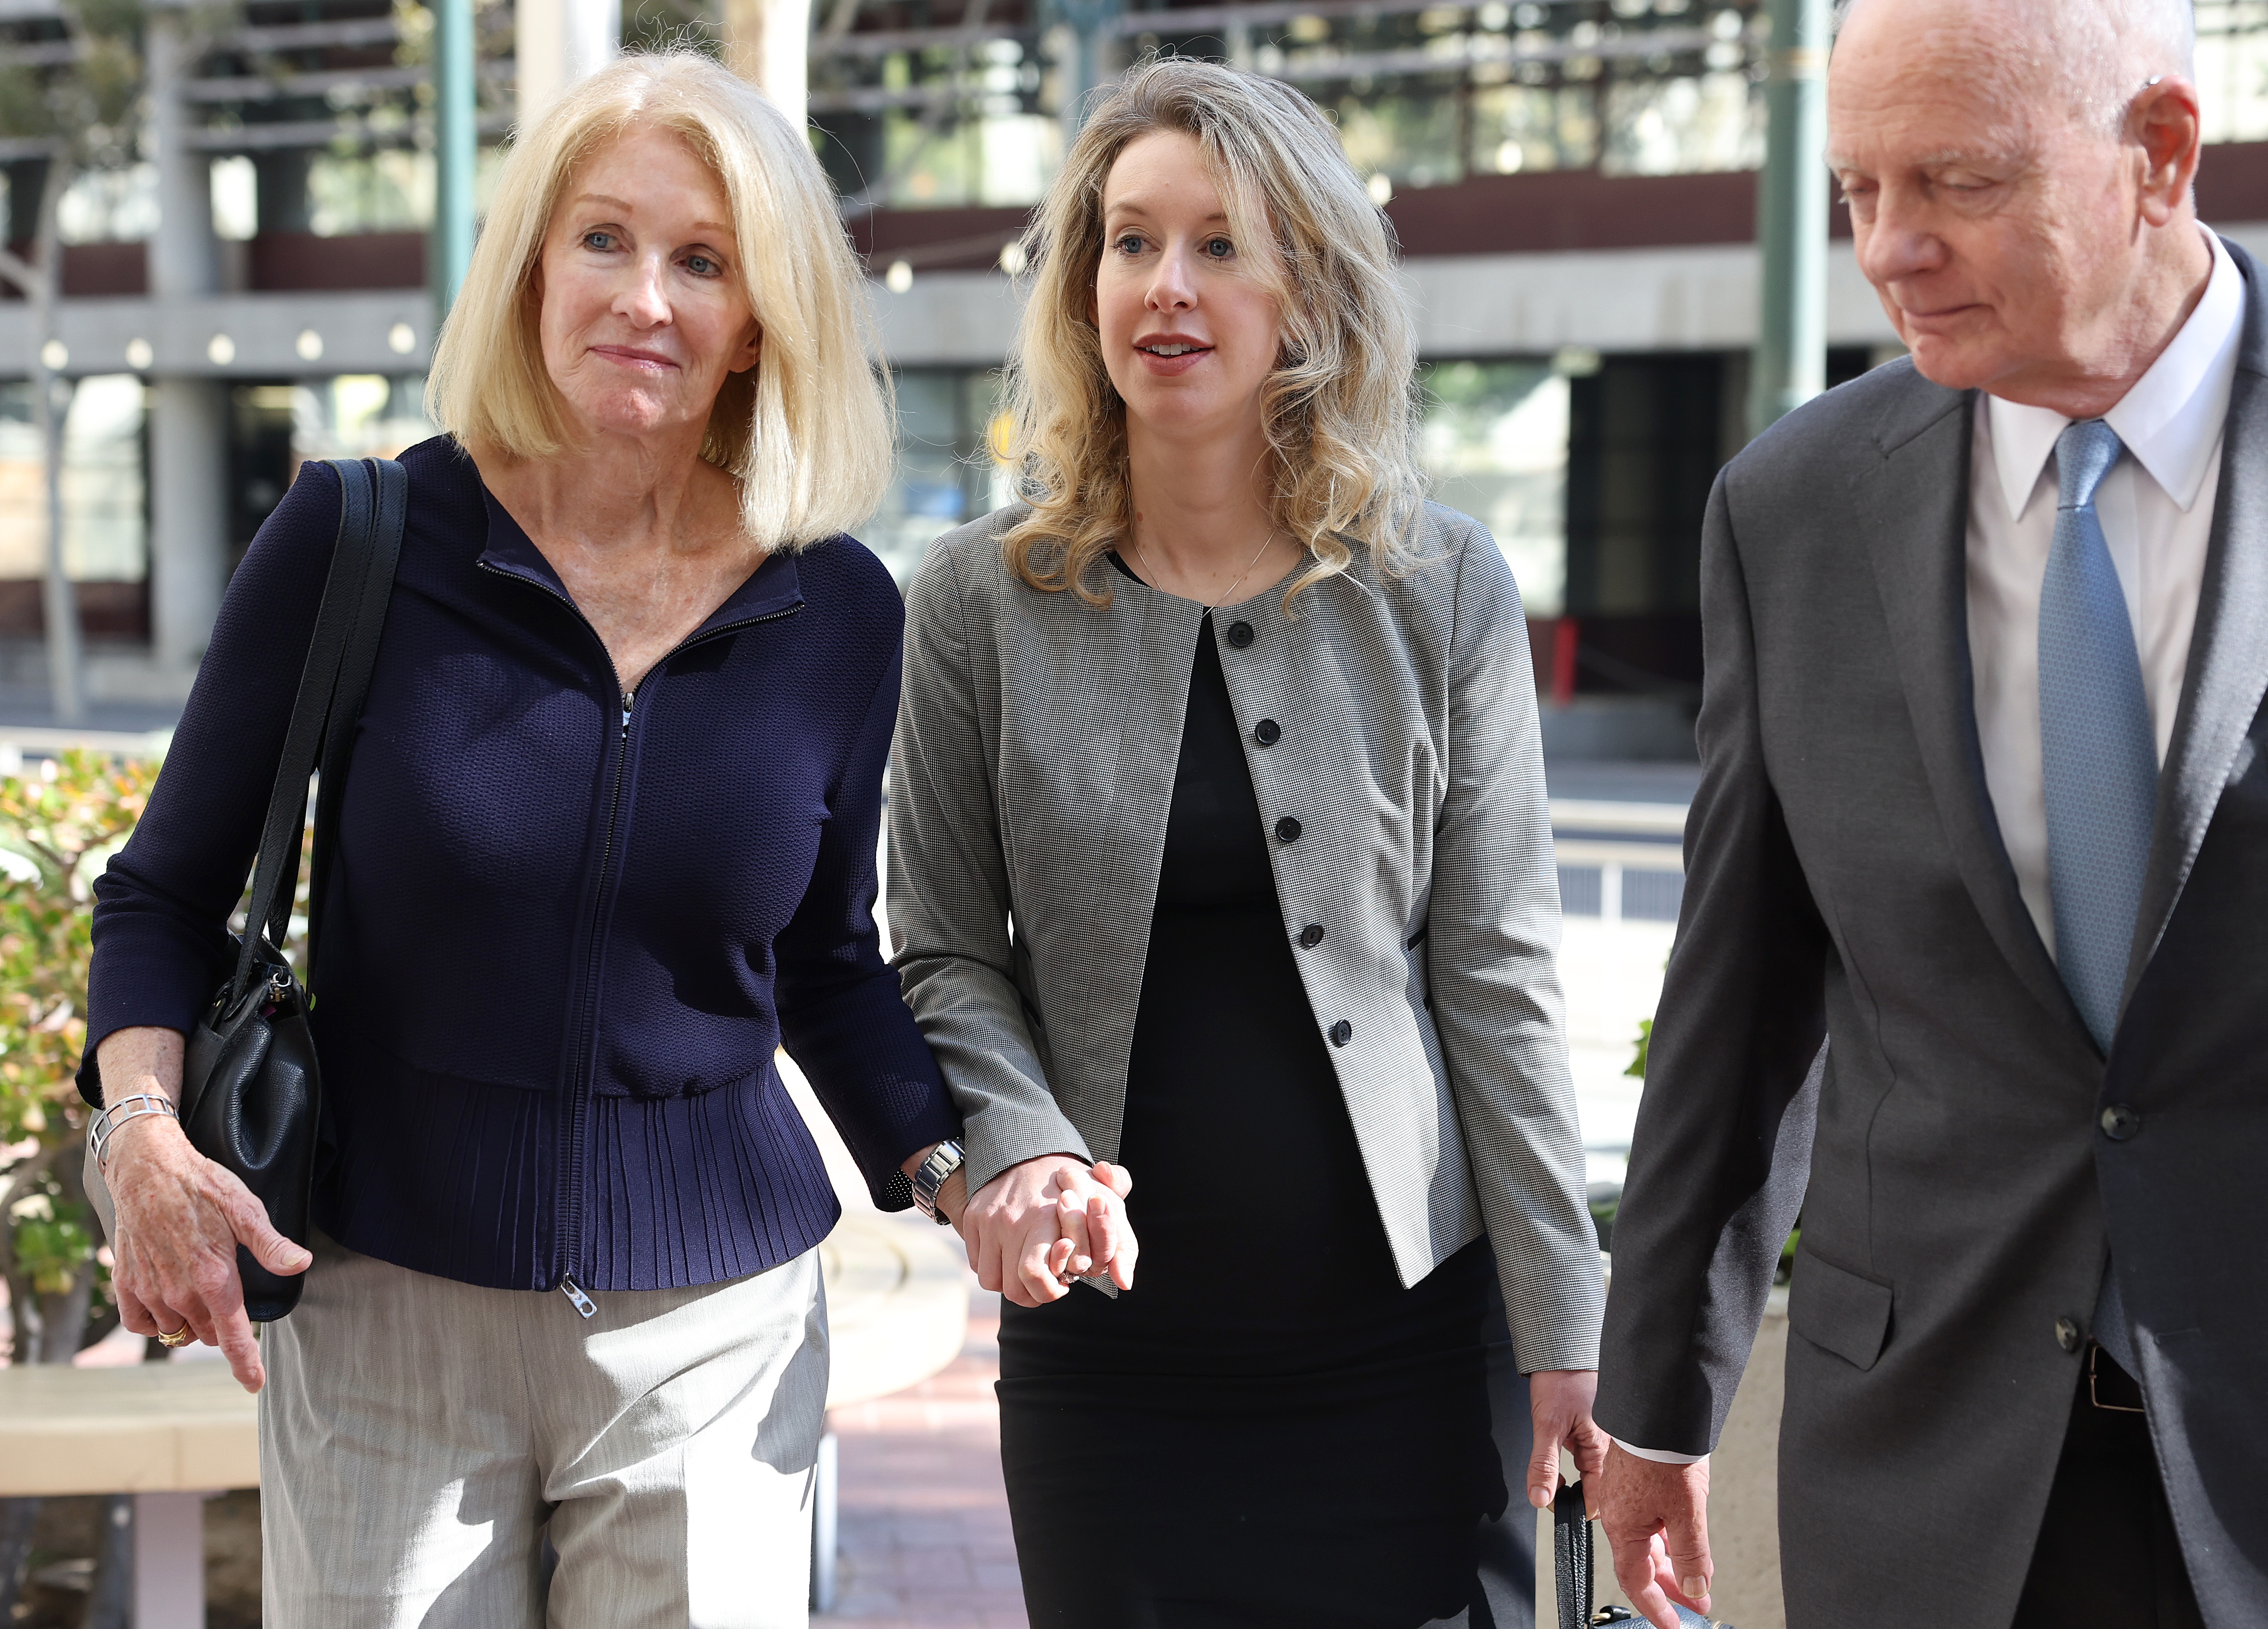 Elizabeth Holmes (C) arrives at federal court with her mother Noel Holmes (L) and father Christian Holmes on September 01, 2022 in San Jose, California. | Source: Getty Images